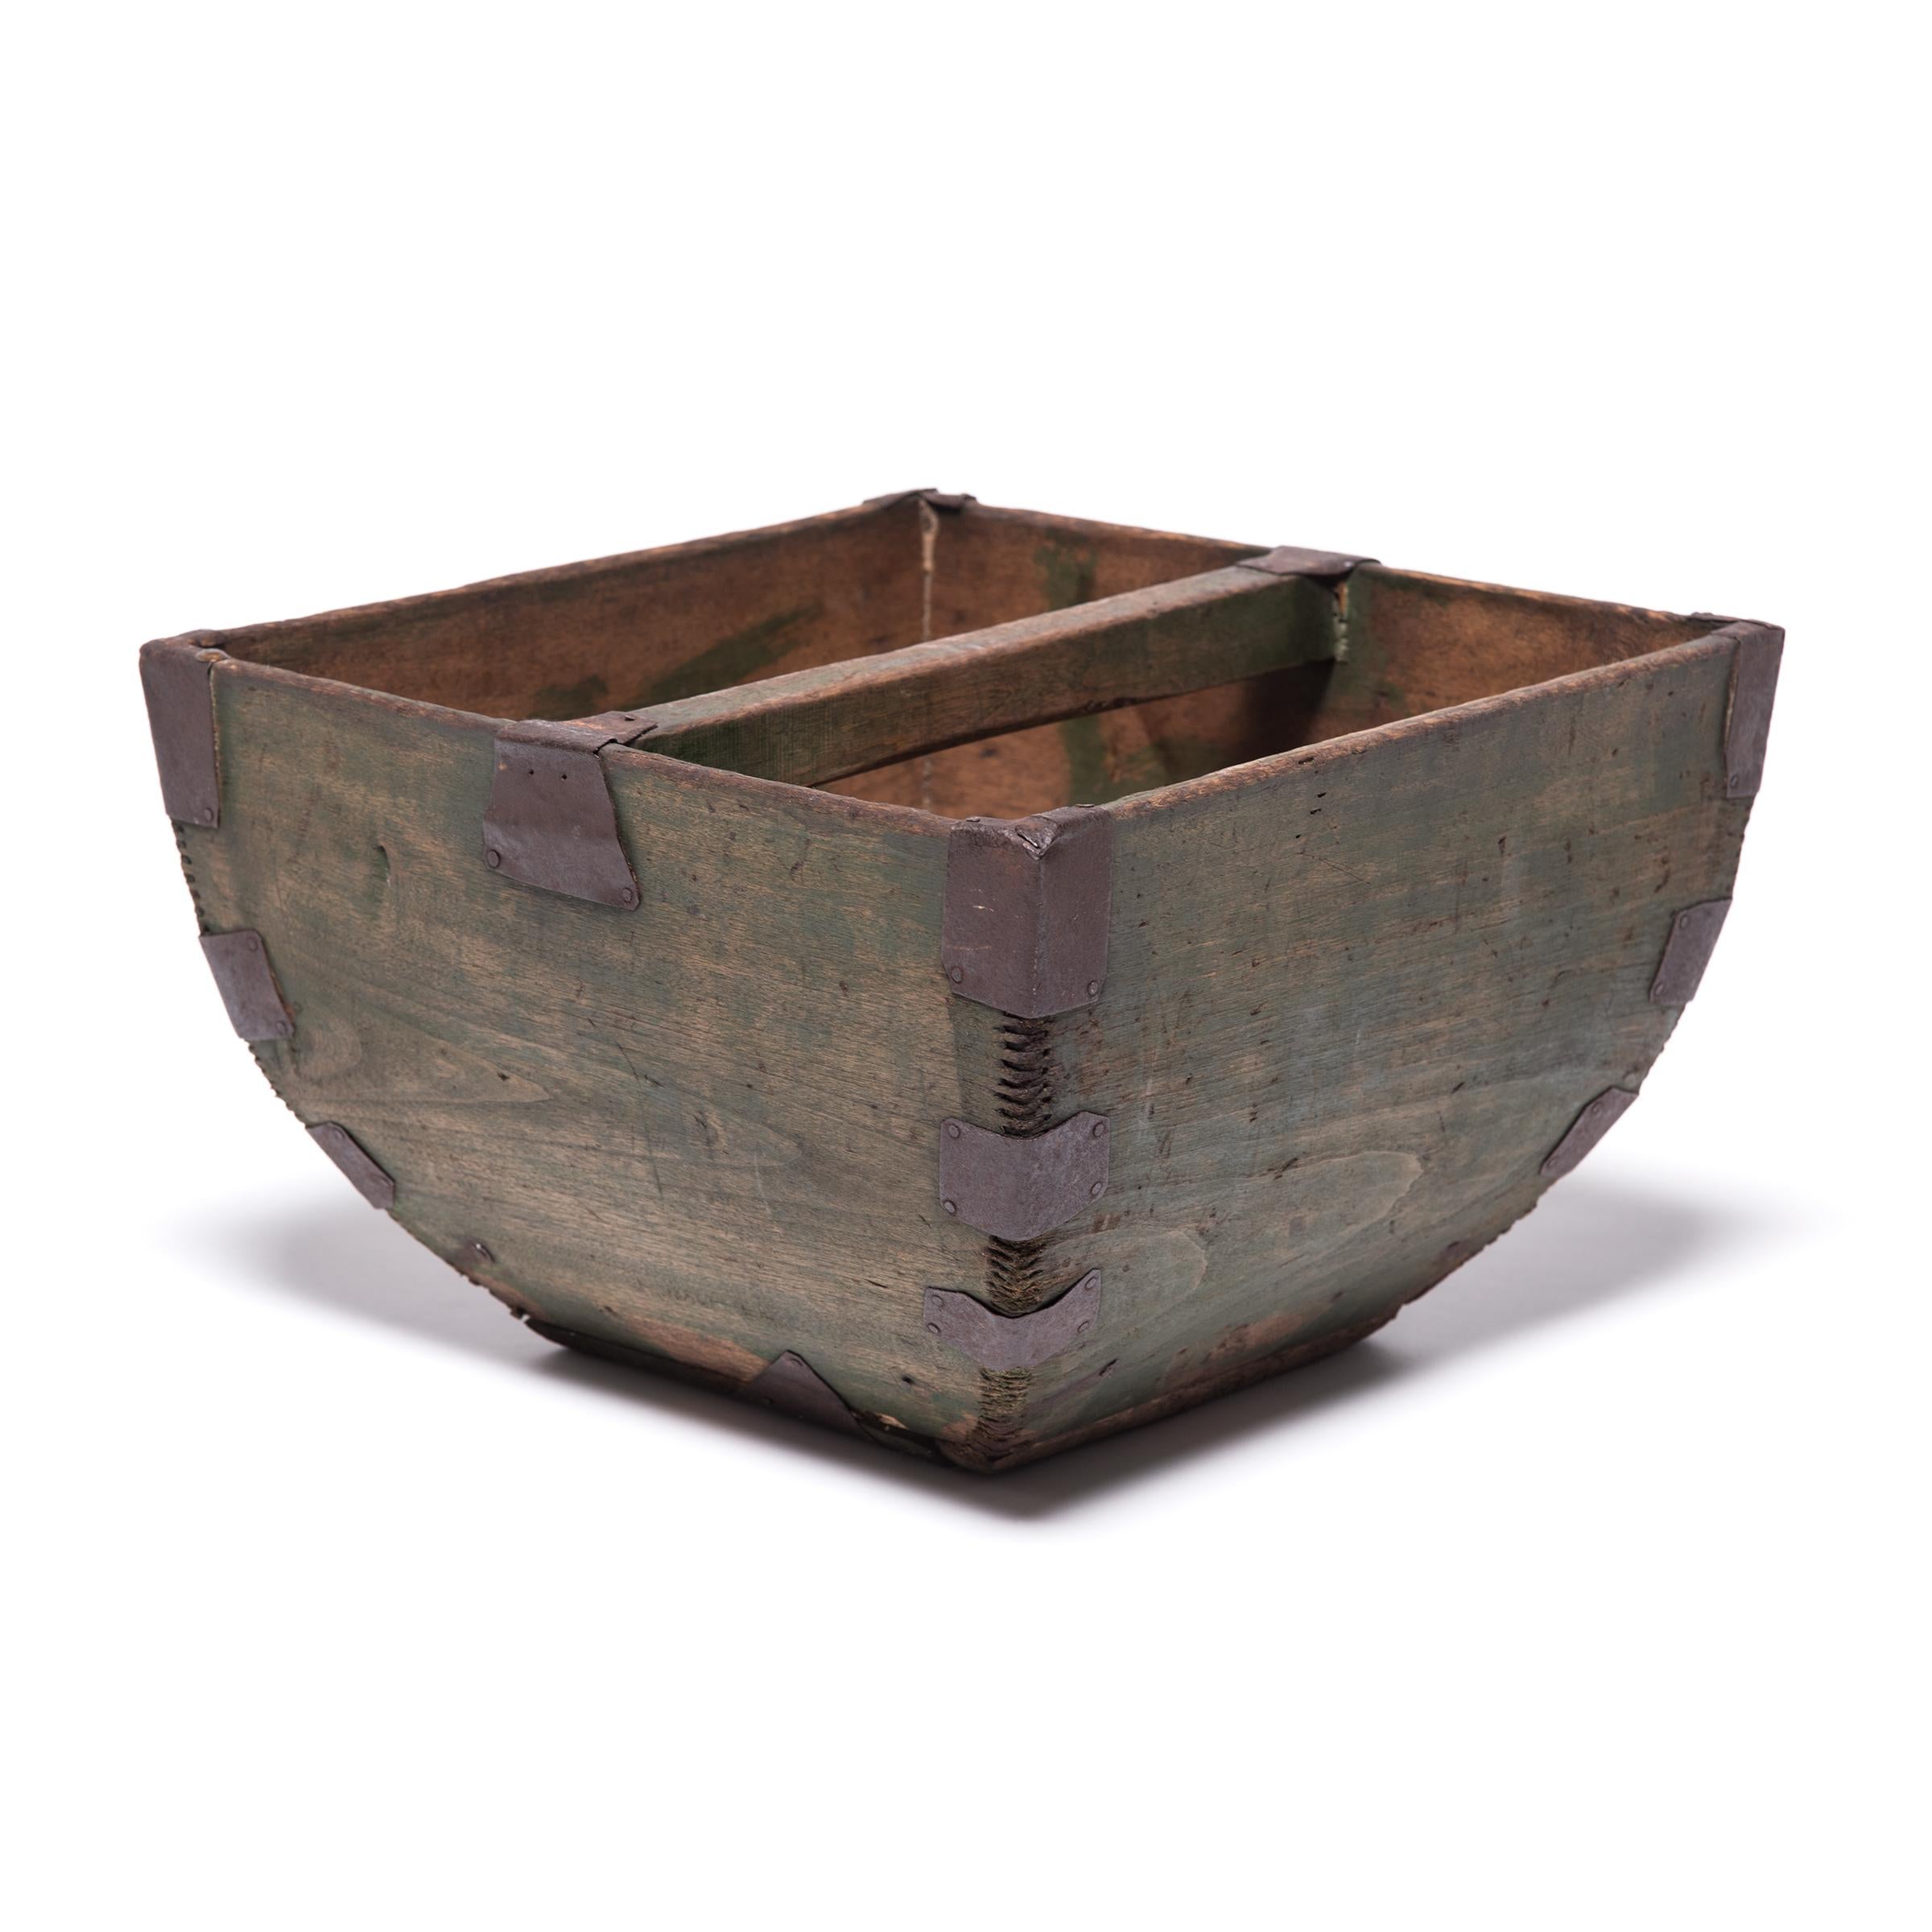 This rustic container was made over a hundred years ago to measure and hold a dou of rice, an ancient Chinese measurement. Handcrafted with dovetail joints, the vessel has gracefully swelling sides and an arched handle, burnished from years of use.